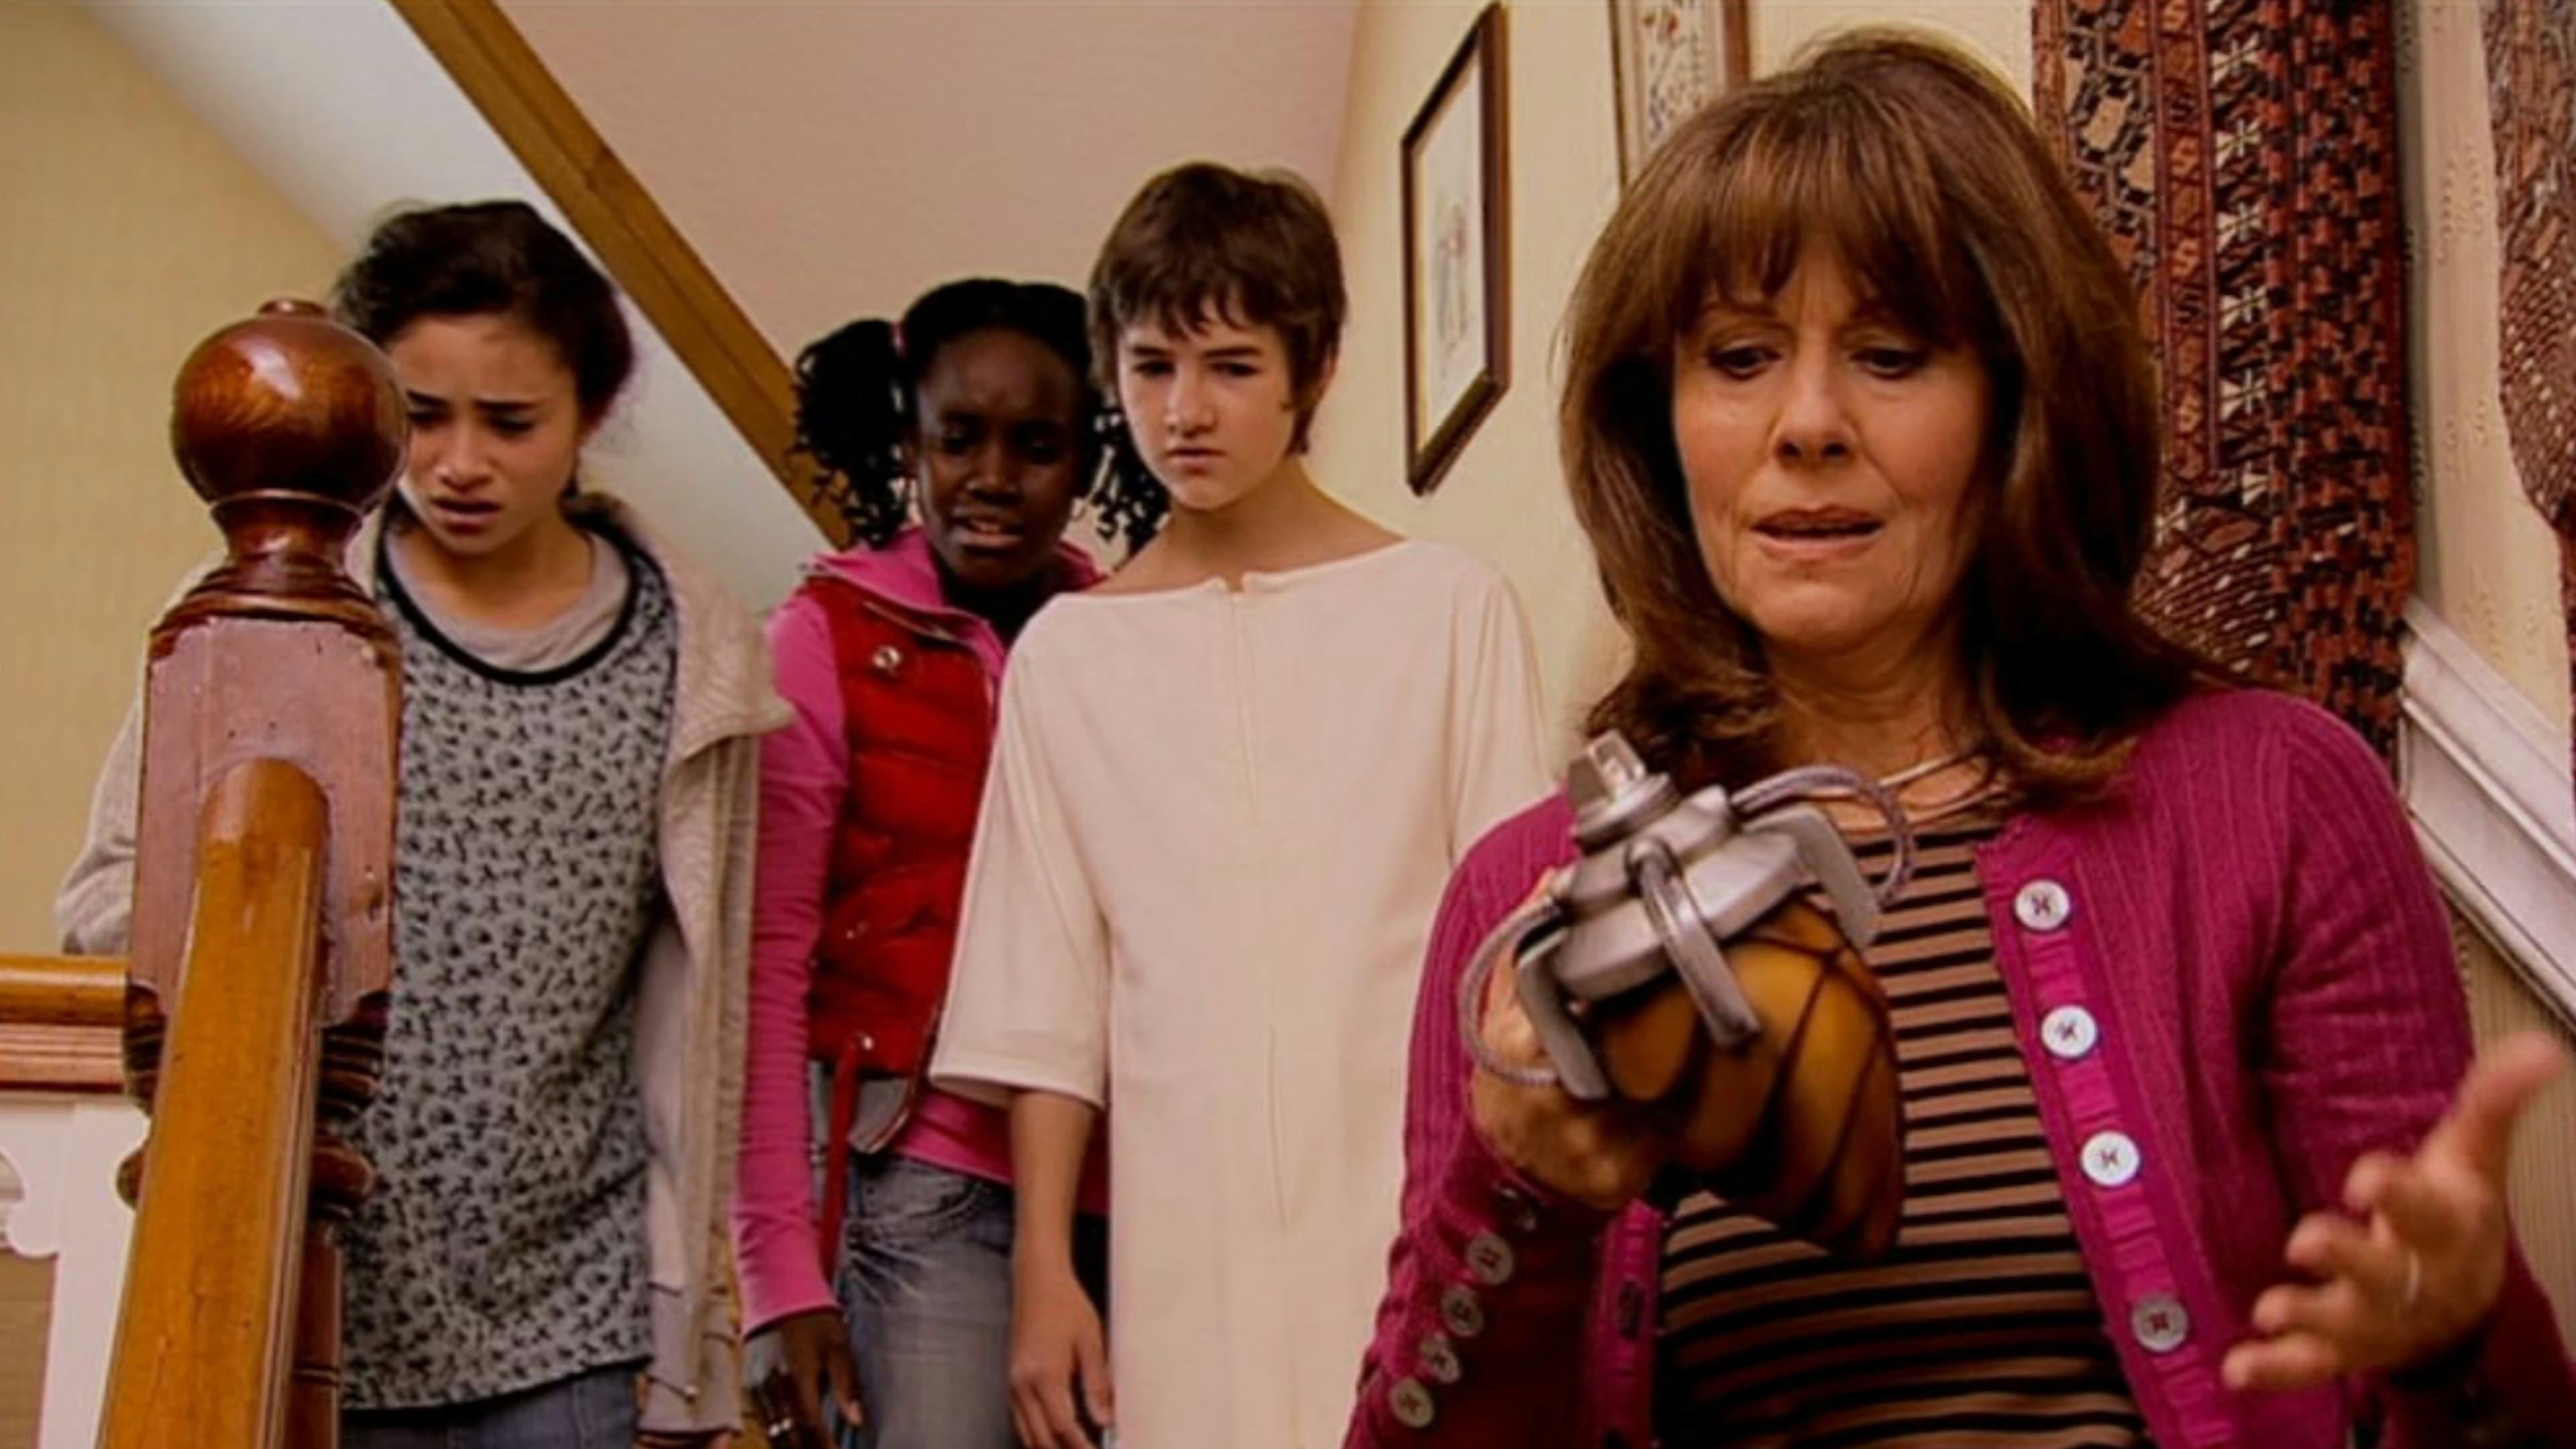 The Sarah Jane Adventures: Invasion of the Bane backdrop